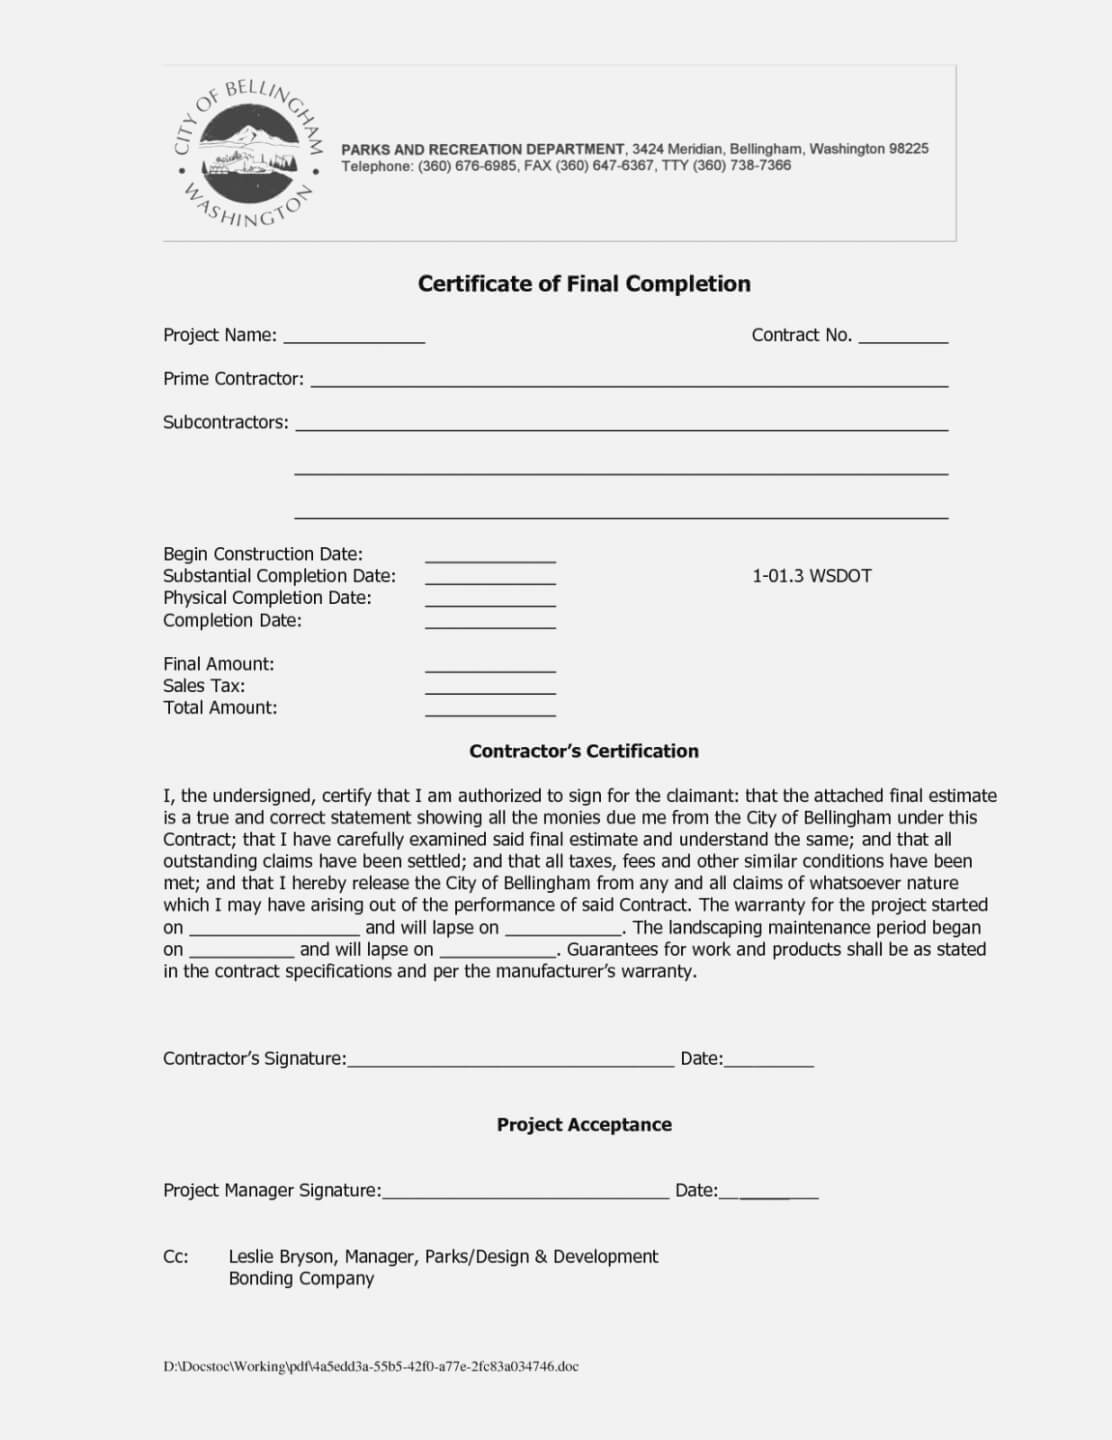 Roofing Certificate Of Completion Template – Yatay In Certificate Of Substantial Completion Template